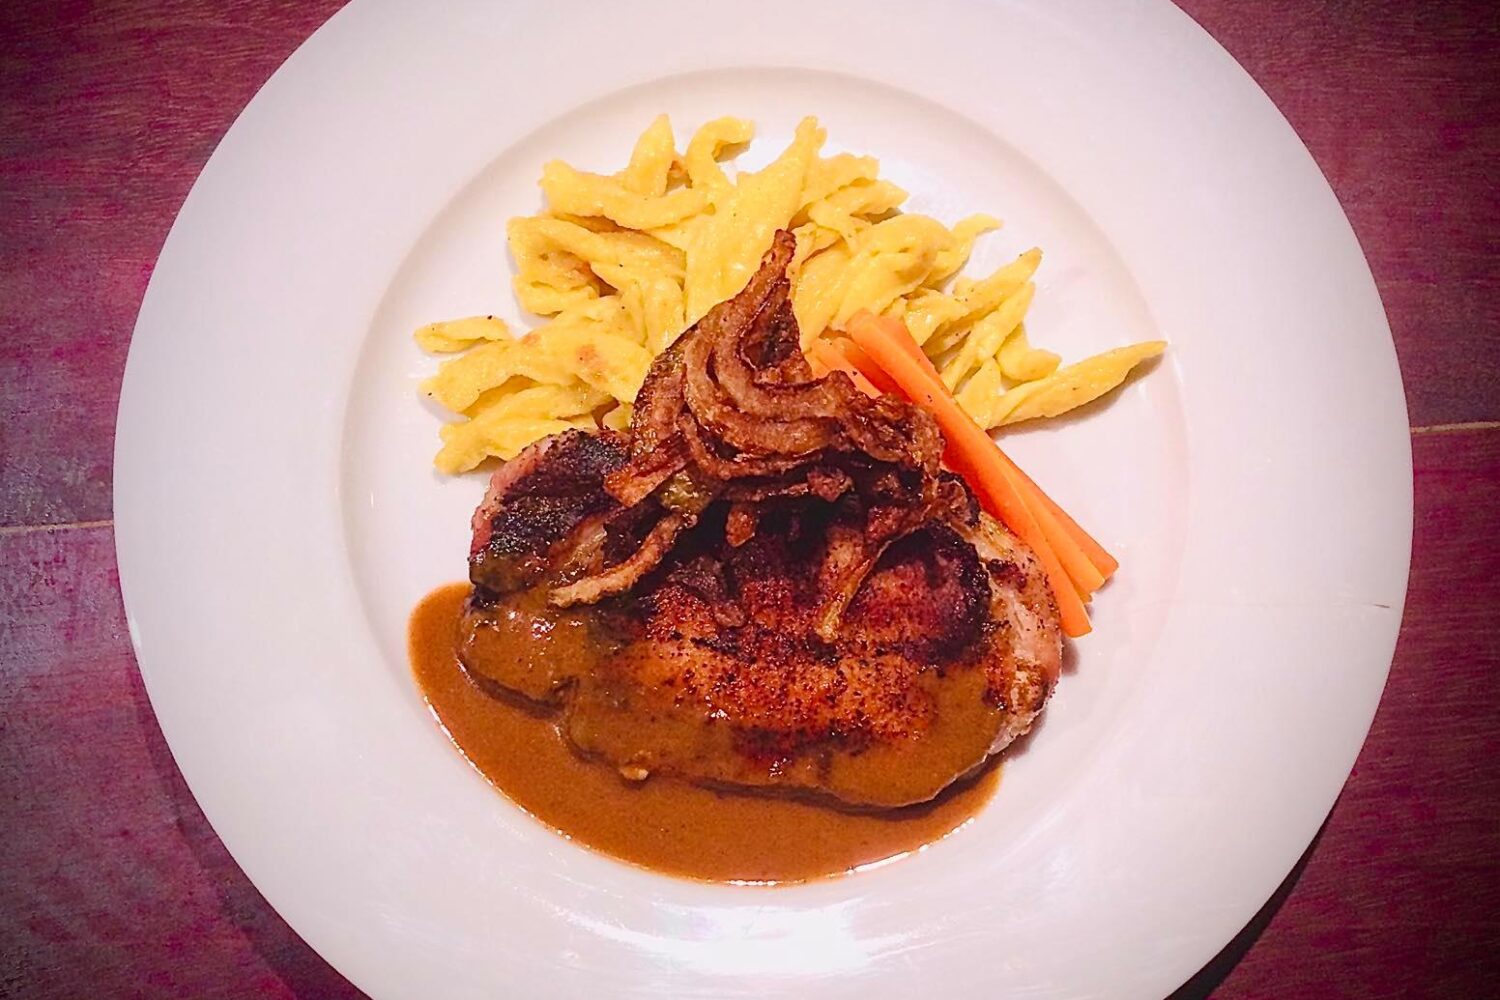 Pork loin with roasted onions, glazed carrots and spaetzle